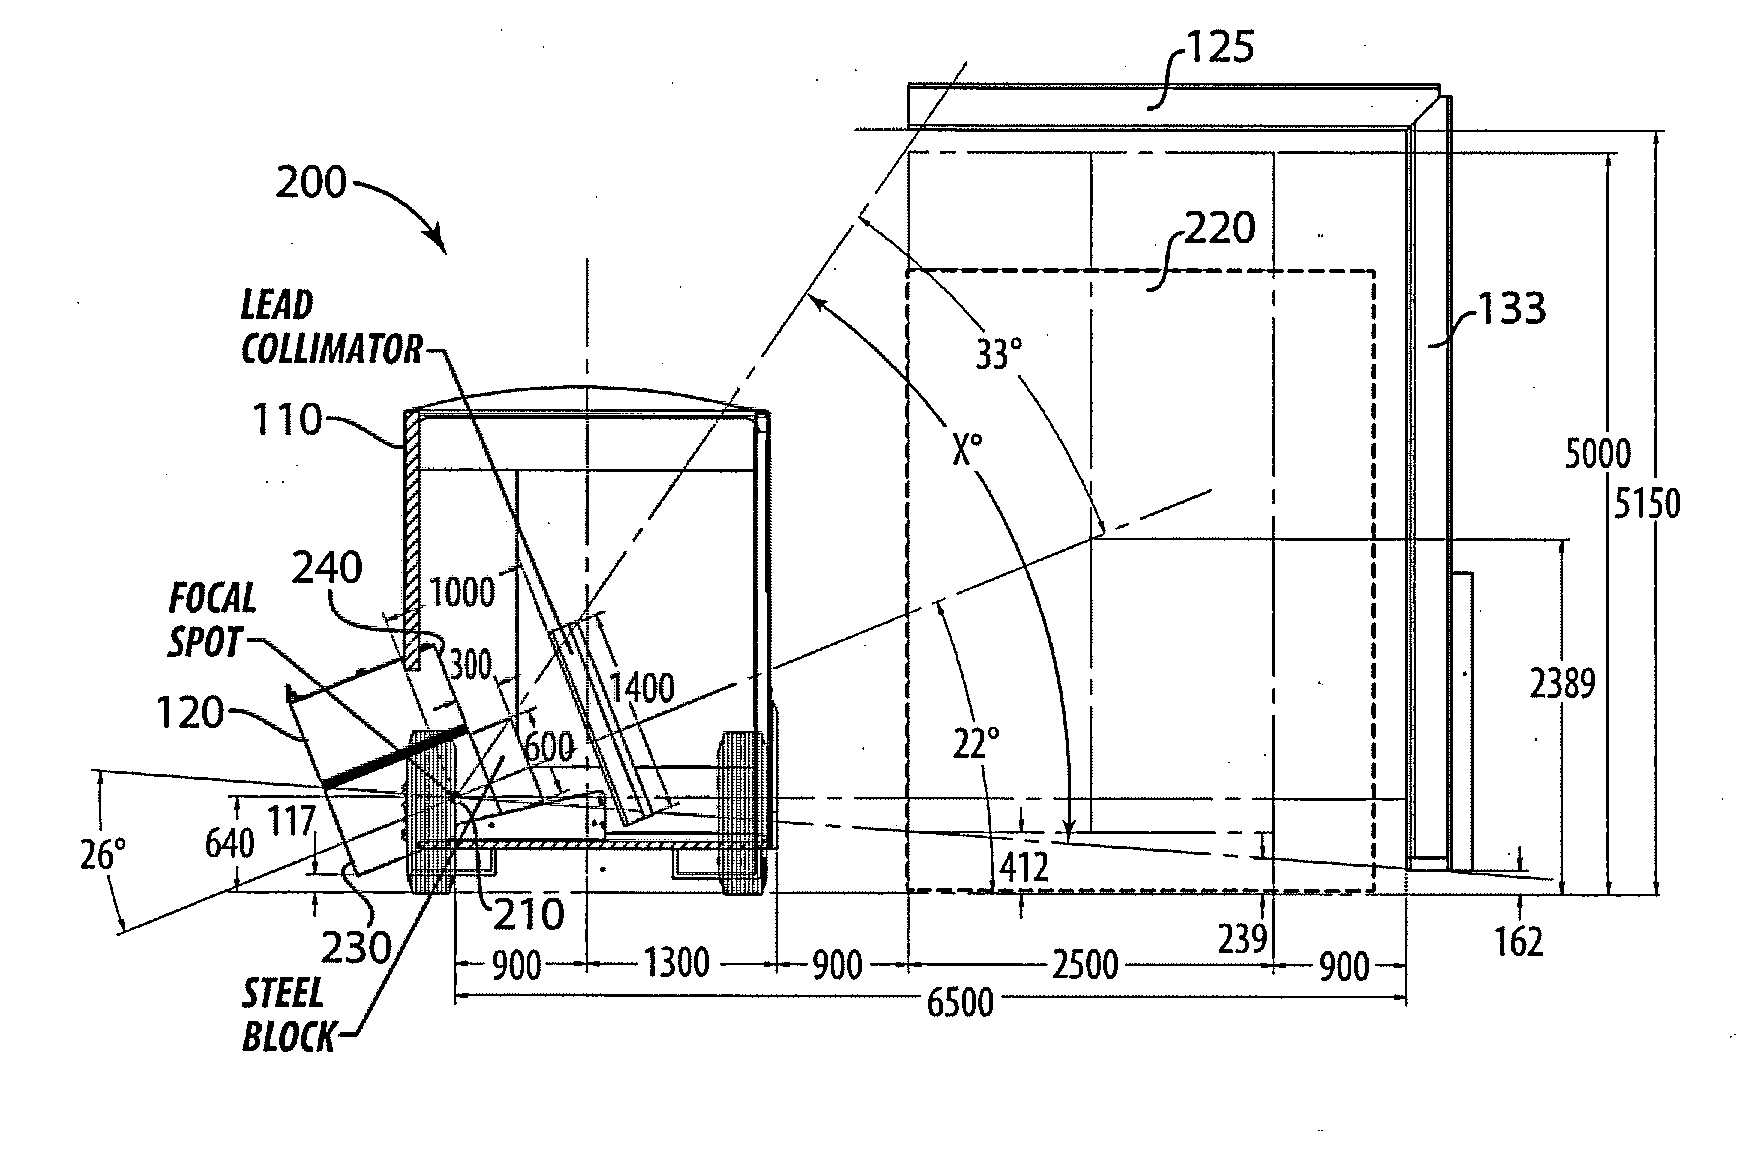 Vehicle-mounted cargo inspection system